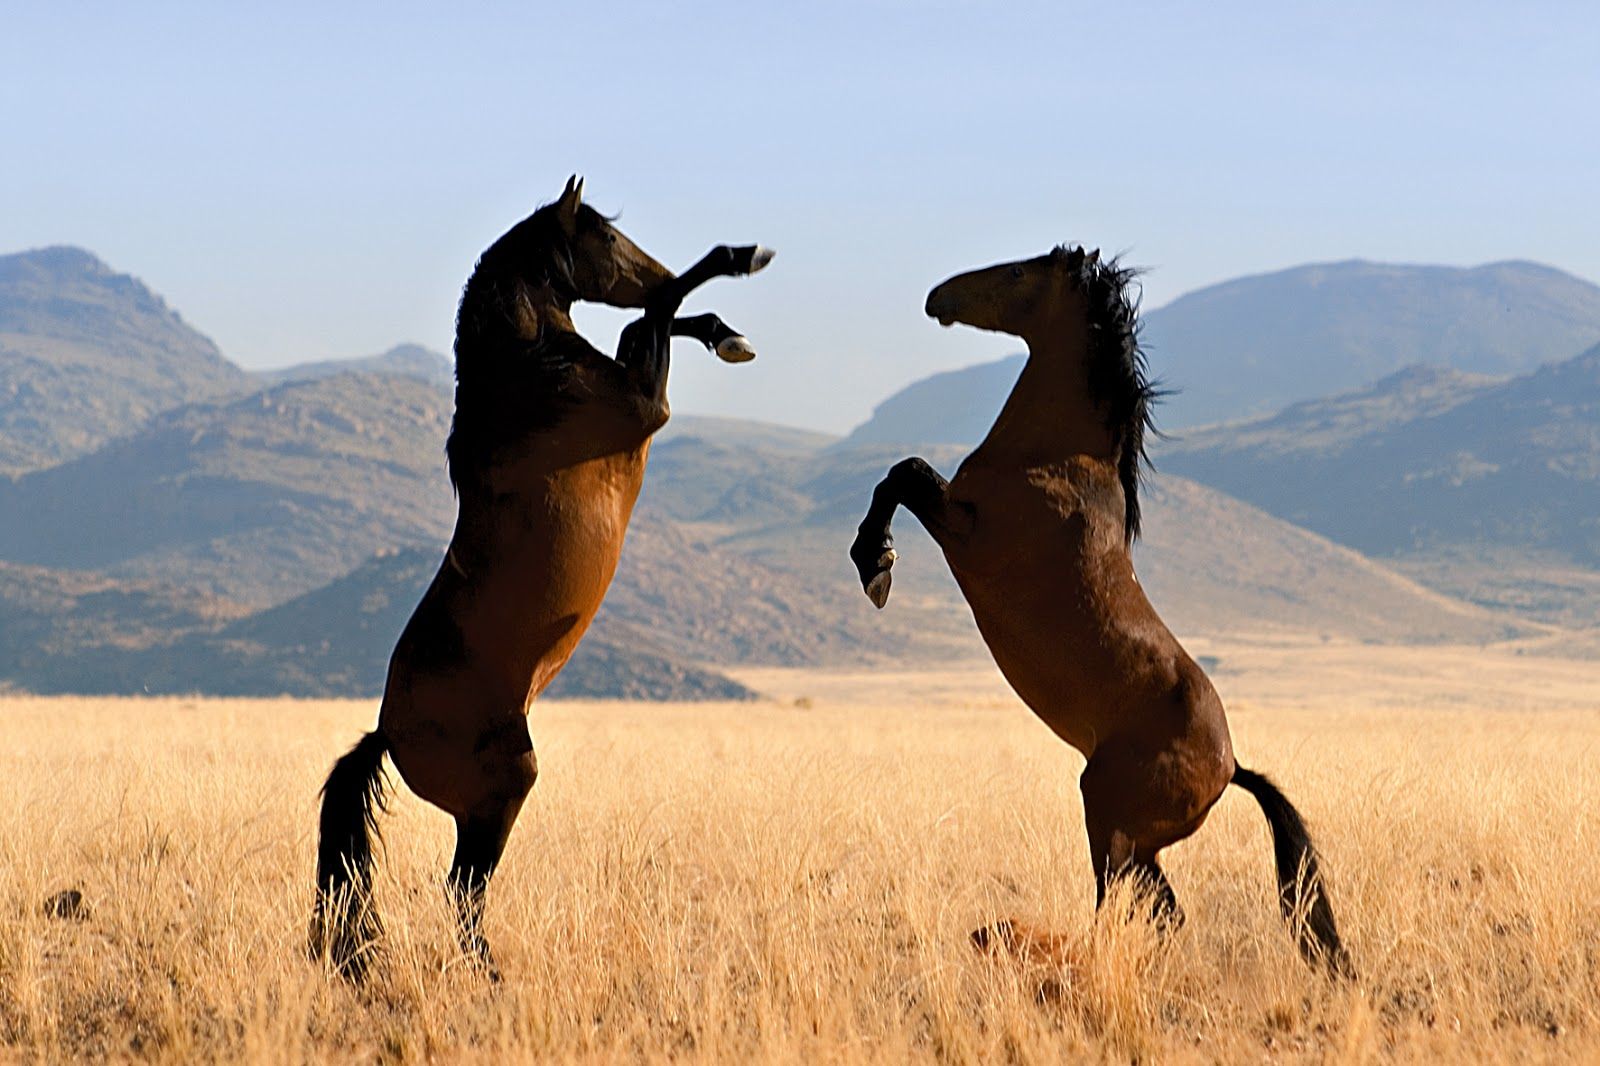 Download HD Wallpapers of Horses Free Desk Backgrounds